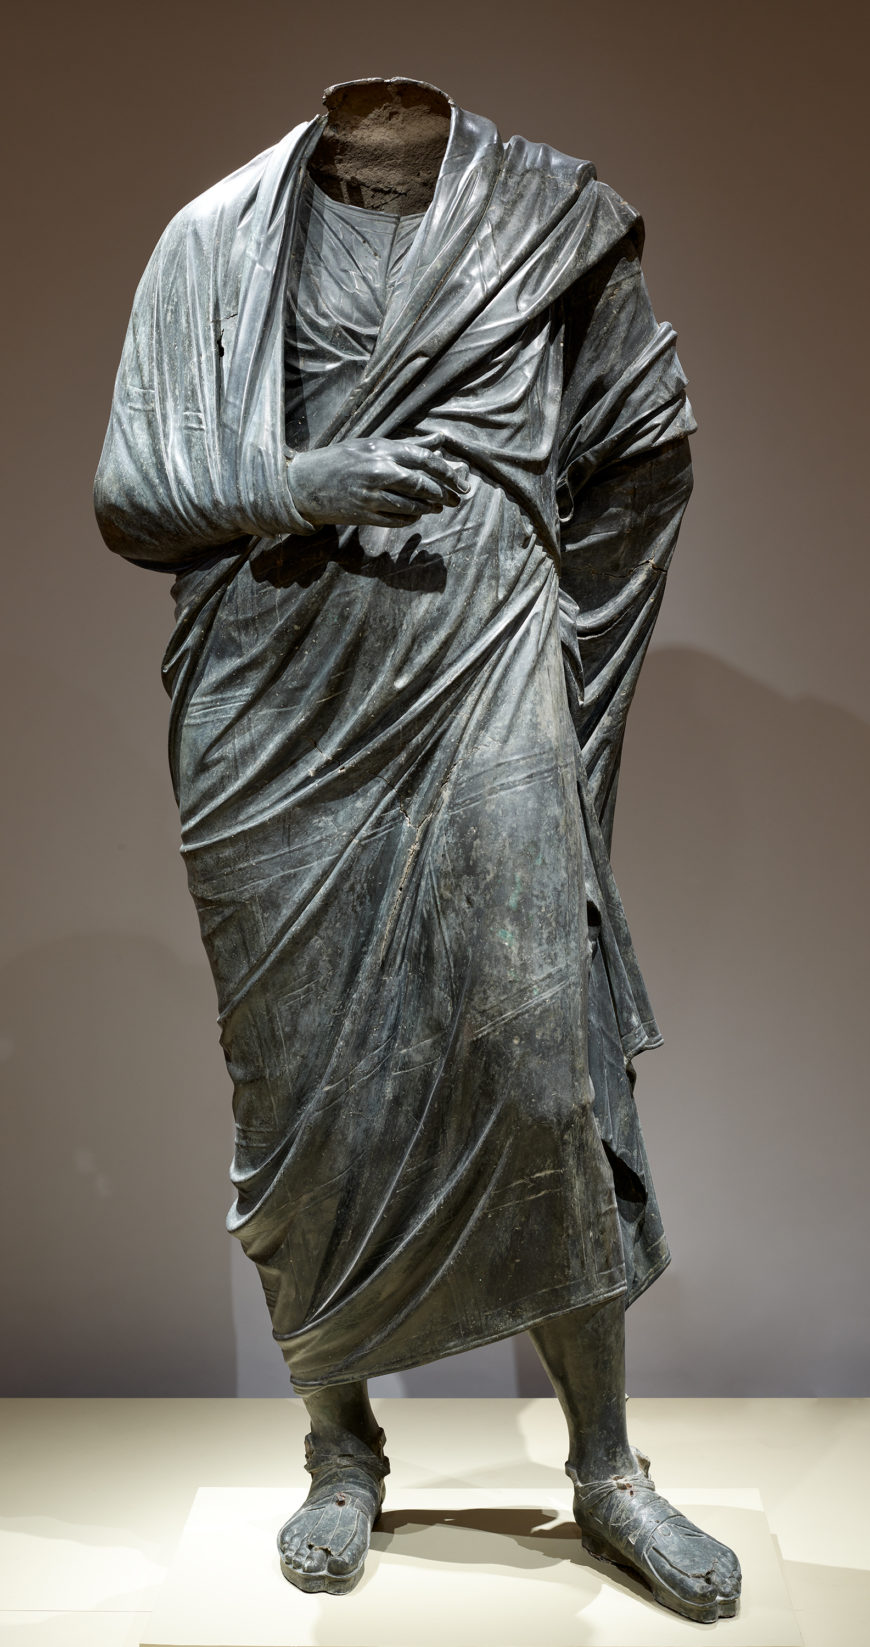 Bronze statue identified as Marcus Aurelius, likely one of a large number of bronzes that were looted from an archaeological site in southern Turkey called Bubon in the 1960s and sold to American collectors and museums in subsequent decades (Cleveland Museum of Art)